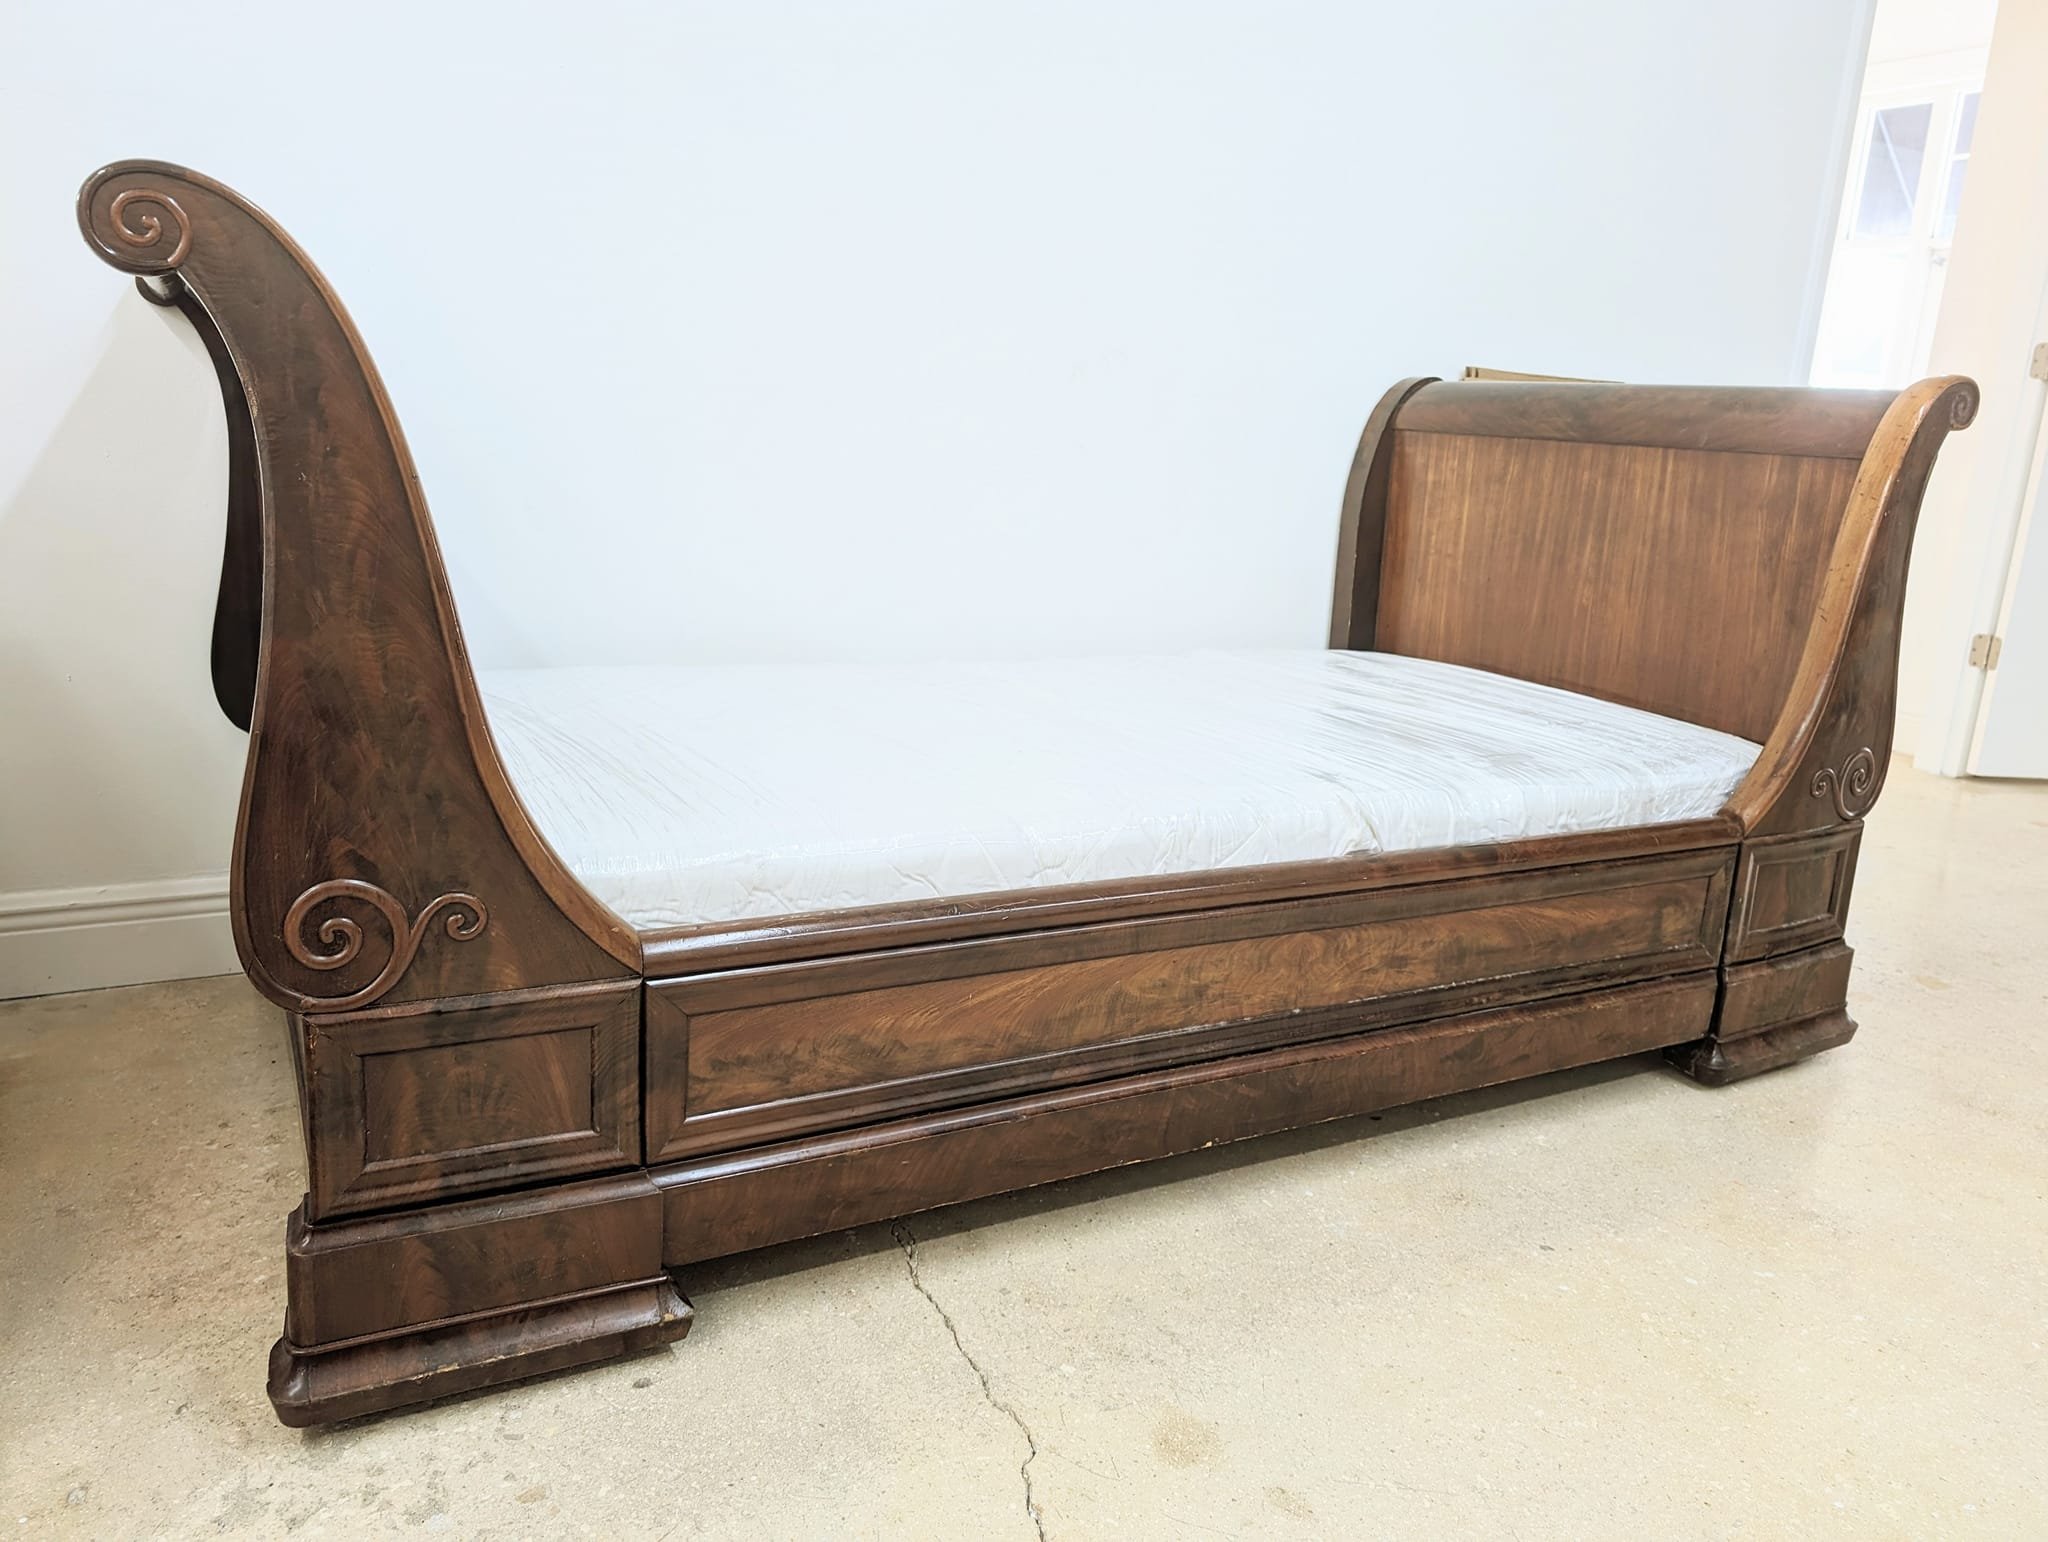 Giveaway! Beautiful mahogany sleigh bed, slightly smaller than a twin size bed, great for a child! Custom sized mattress included. DM me to pick up in Coral Gables.